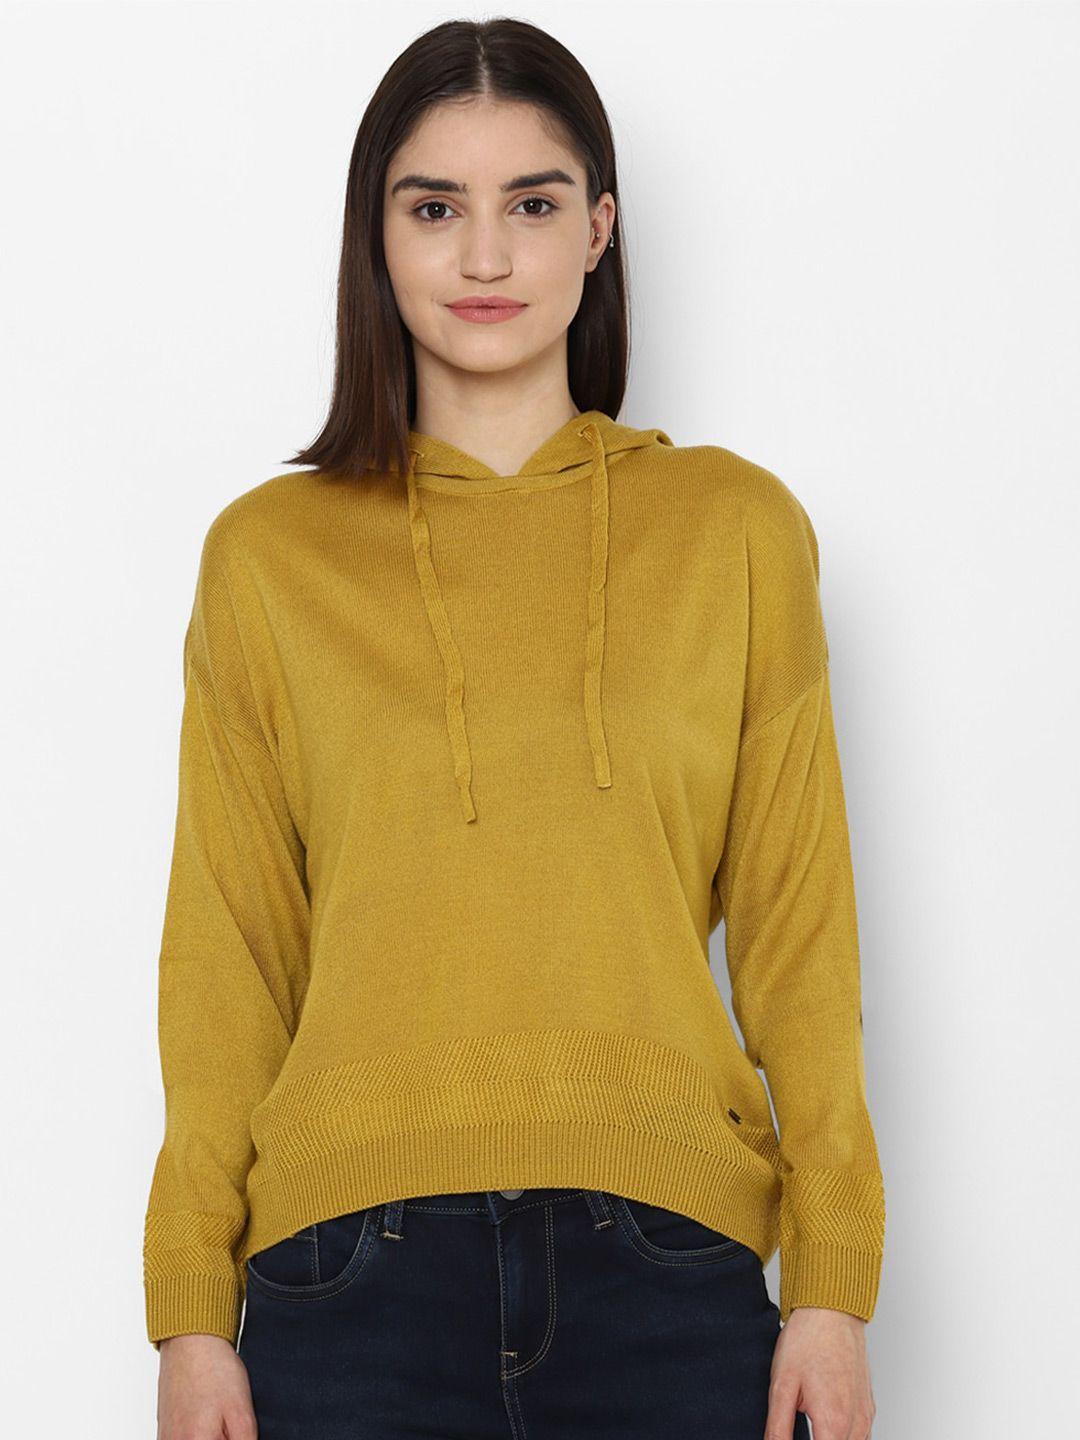 allen solly woman women gold-toned pullover